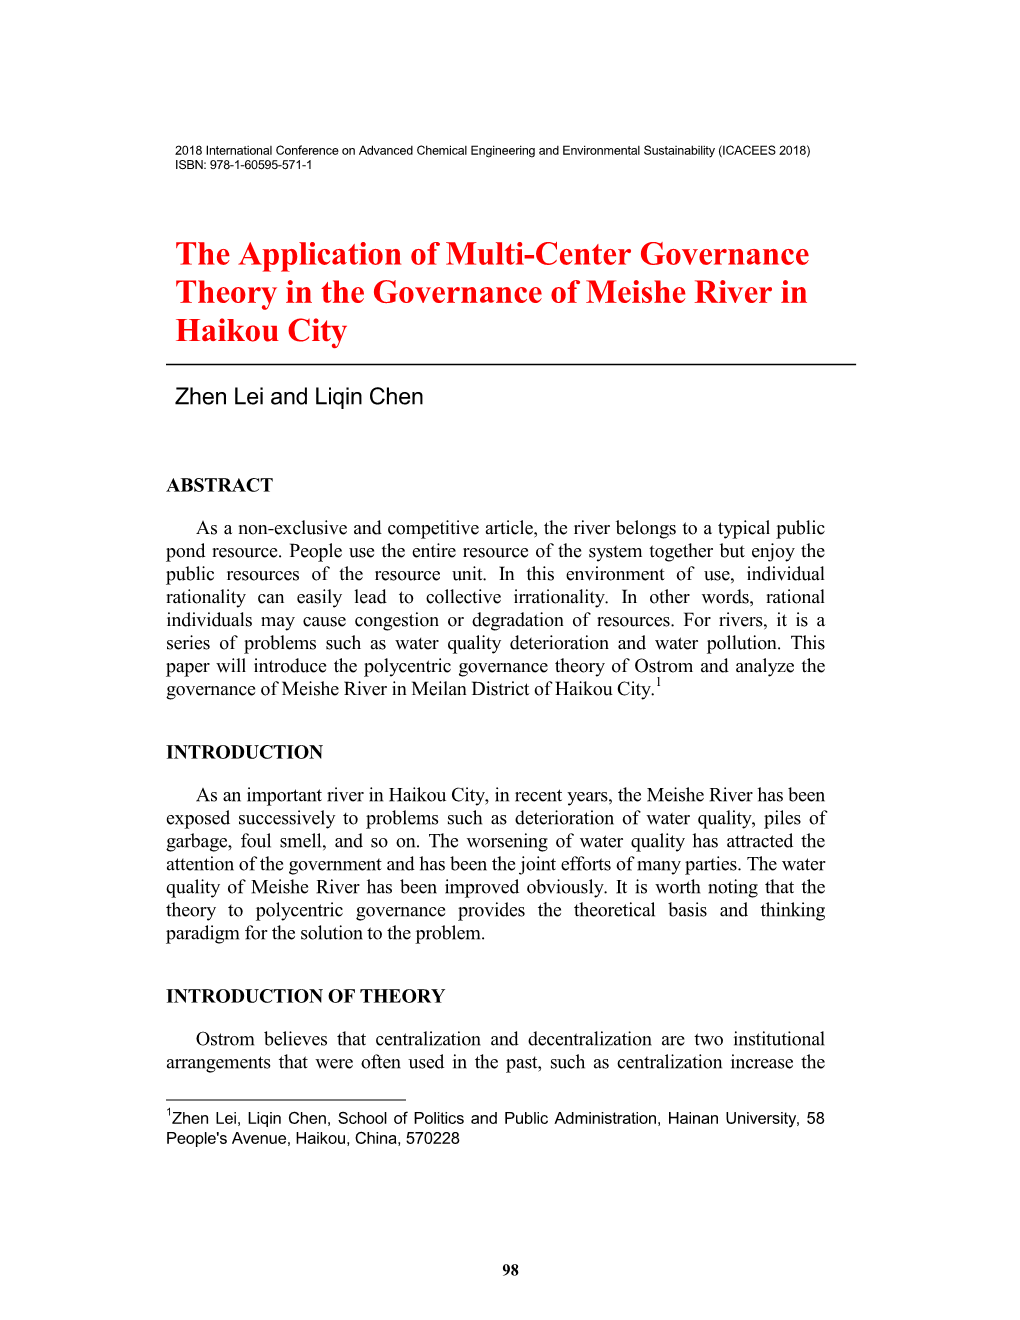 The Application of Multi-Center Governance Theory in the Governance of Meishe River In